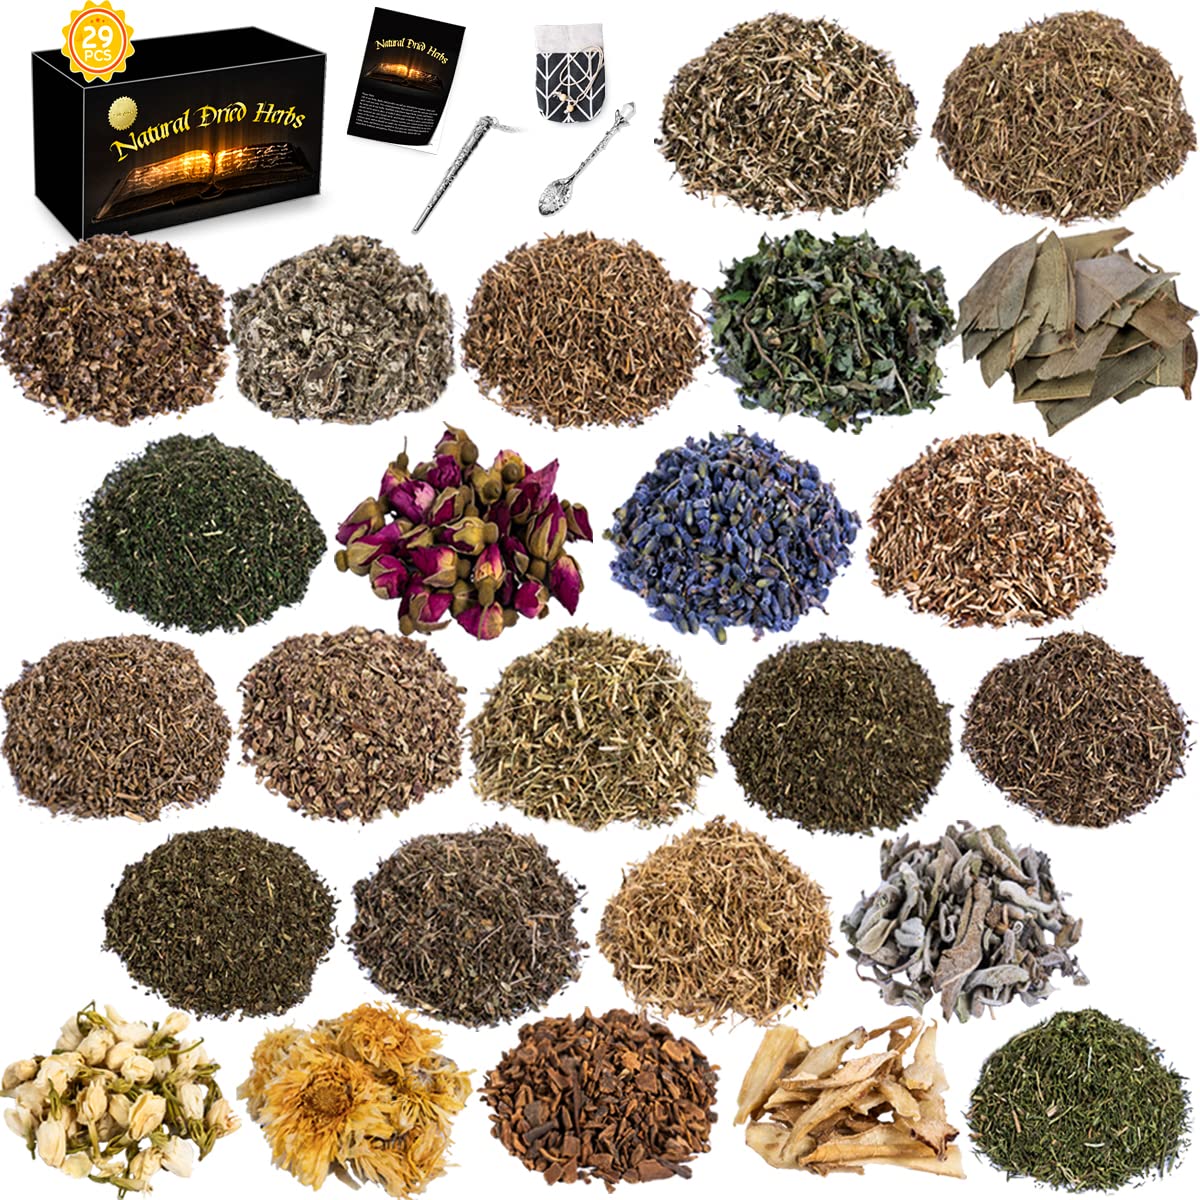 Lulli Dried Herbs for Witchcraft - 24 Bottles of Magical Herbal Supplies  for Pagan, Wiccan, Witch Spells